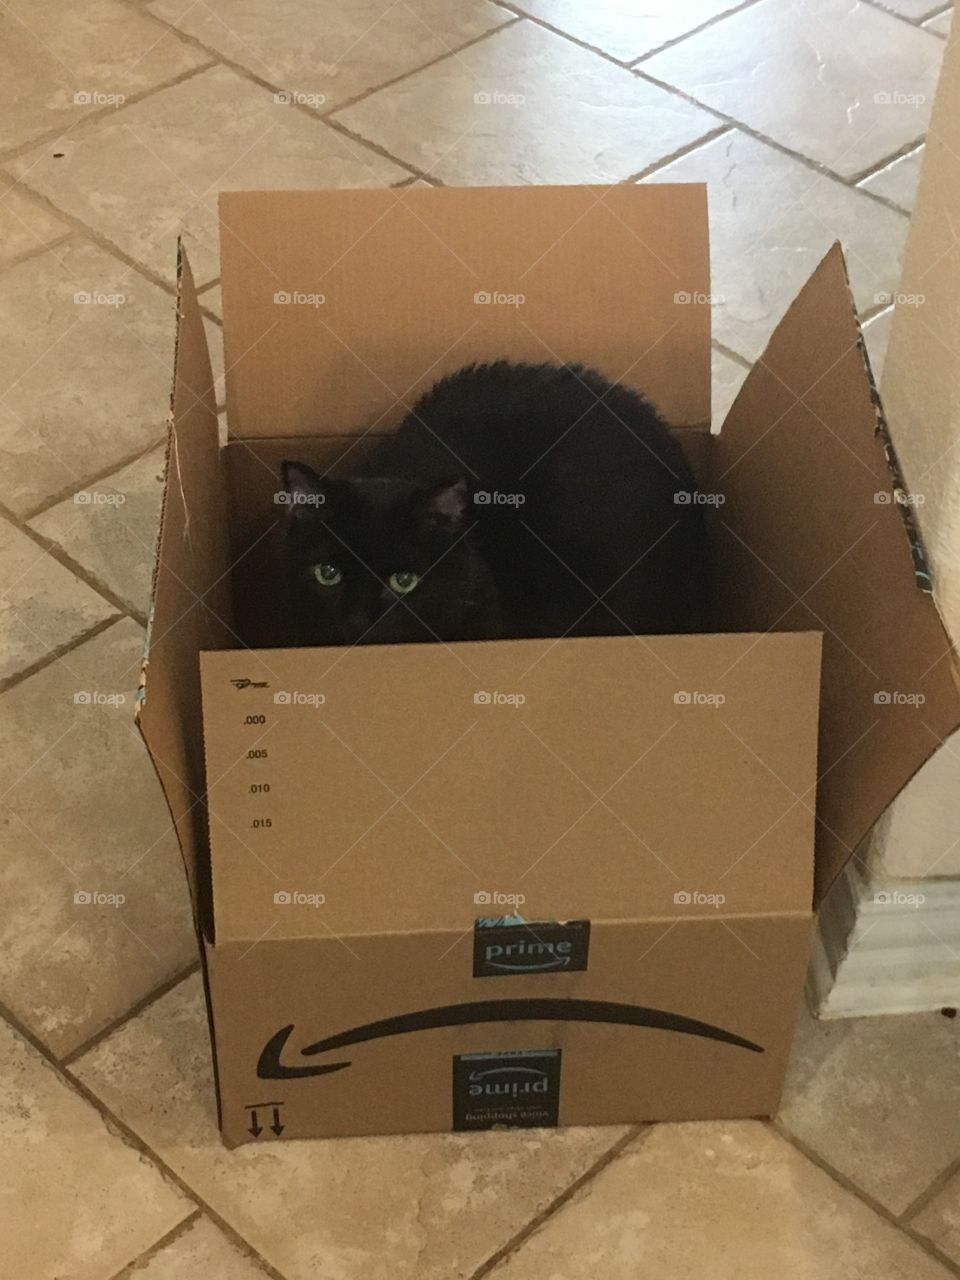 Adult black cat with green eyes in an opened and upturned Amazon box on a tile floor